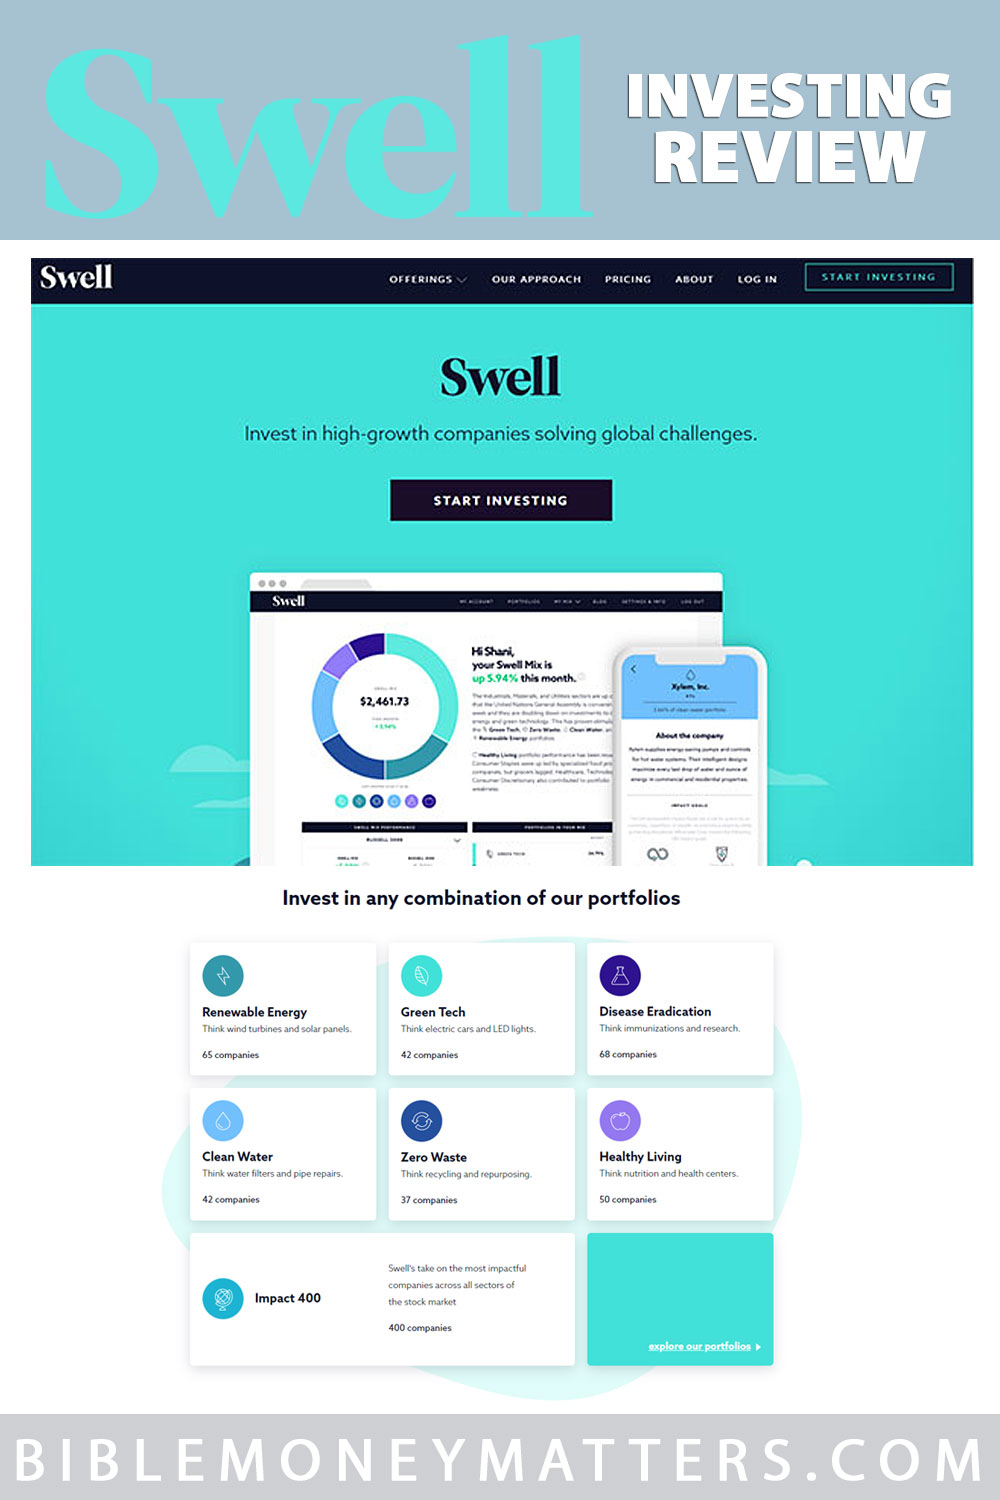 Swell Investing Review: The Socially Responsible Robo-Advisor